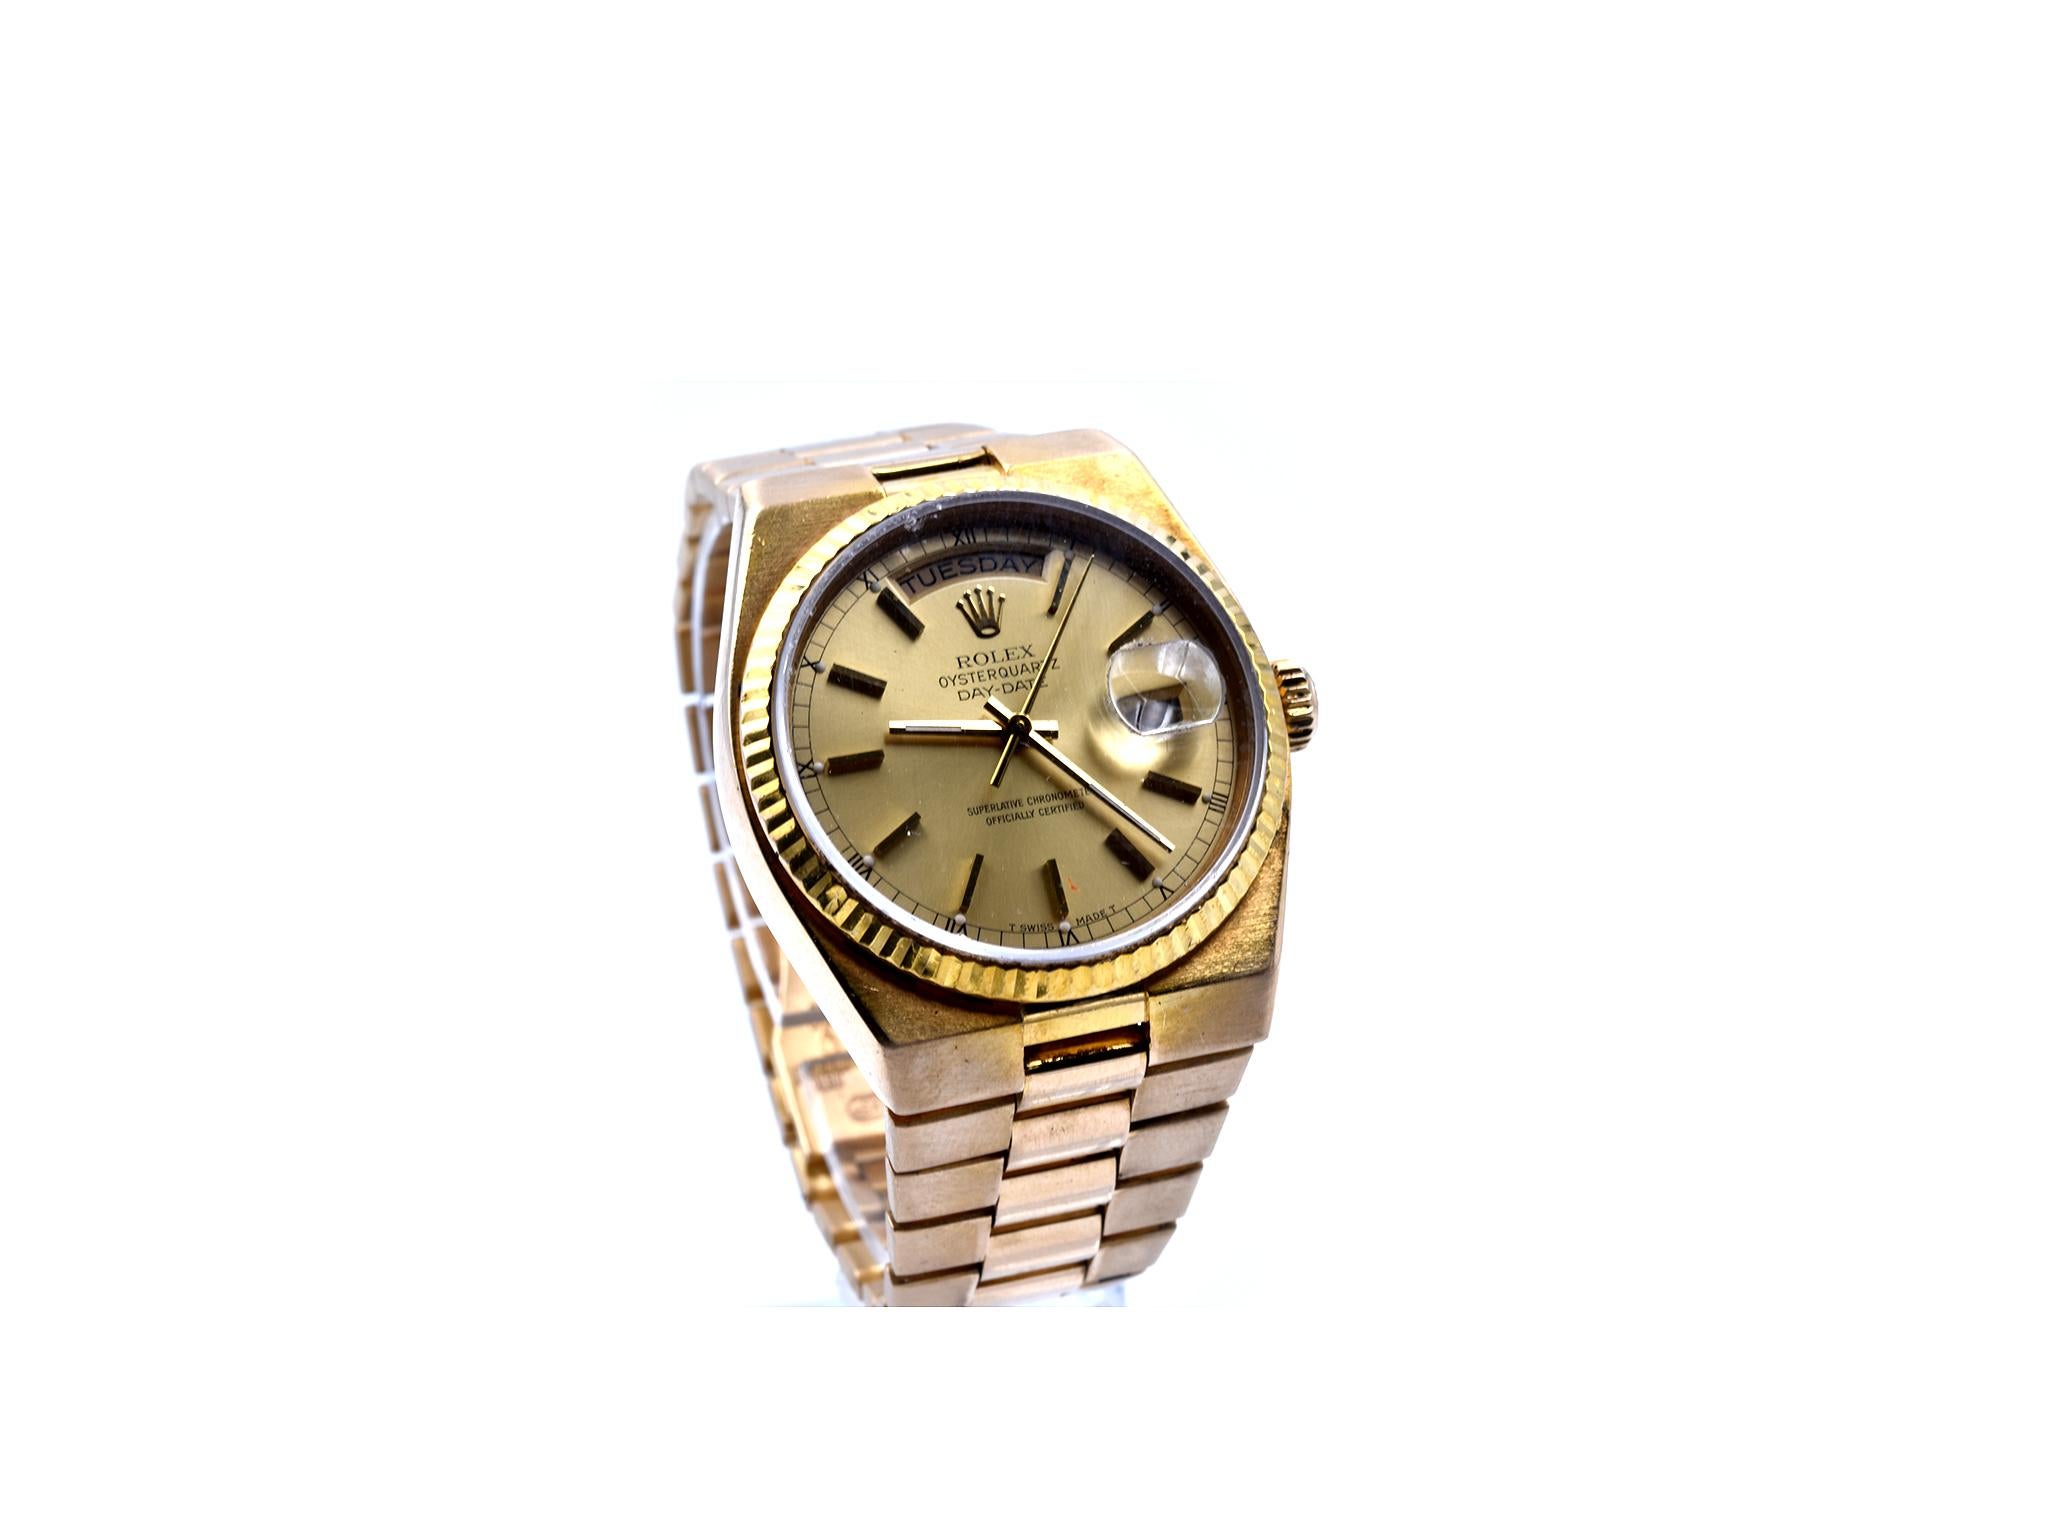 Movement: quartz 
Function: hours, minutes, seconds, date
Case: round 36mm stainless steel case with diamond bezel, sapphire protective crystal, date bubble at 3 o’clock, screw-down crown
Band: 18k yellow gold bracelet with folding clasp
Dial: